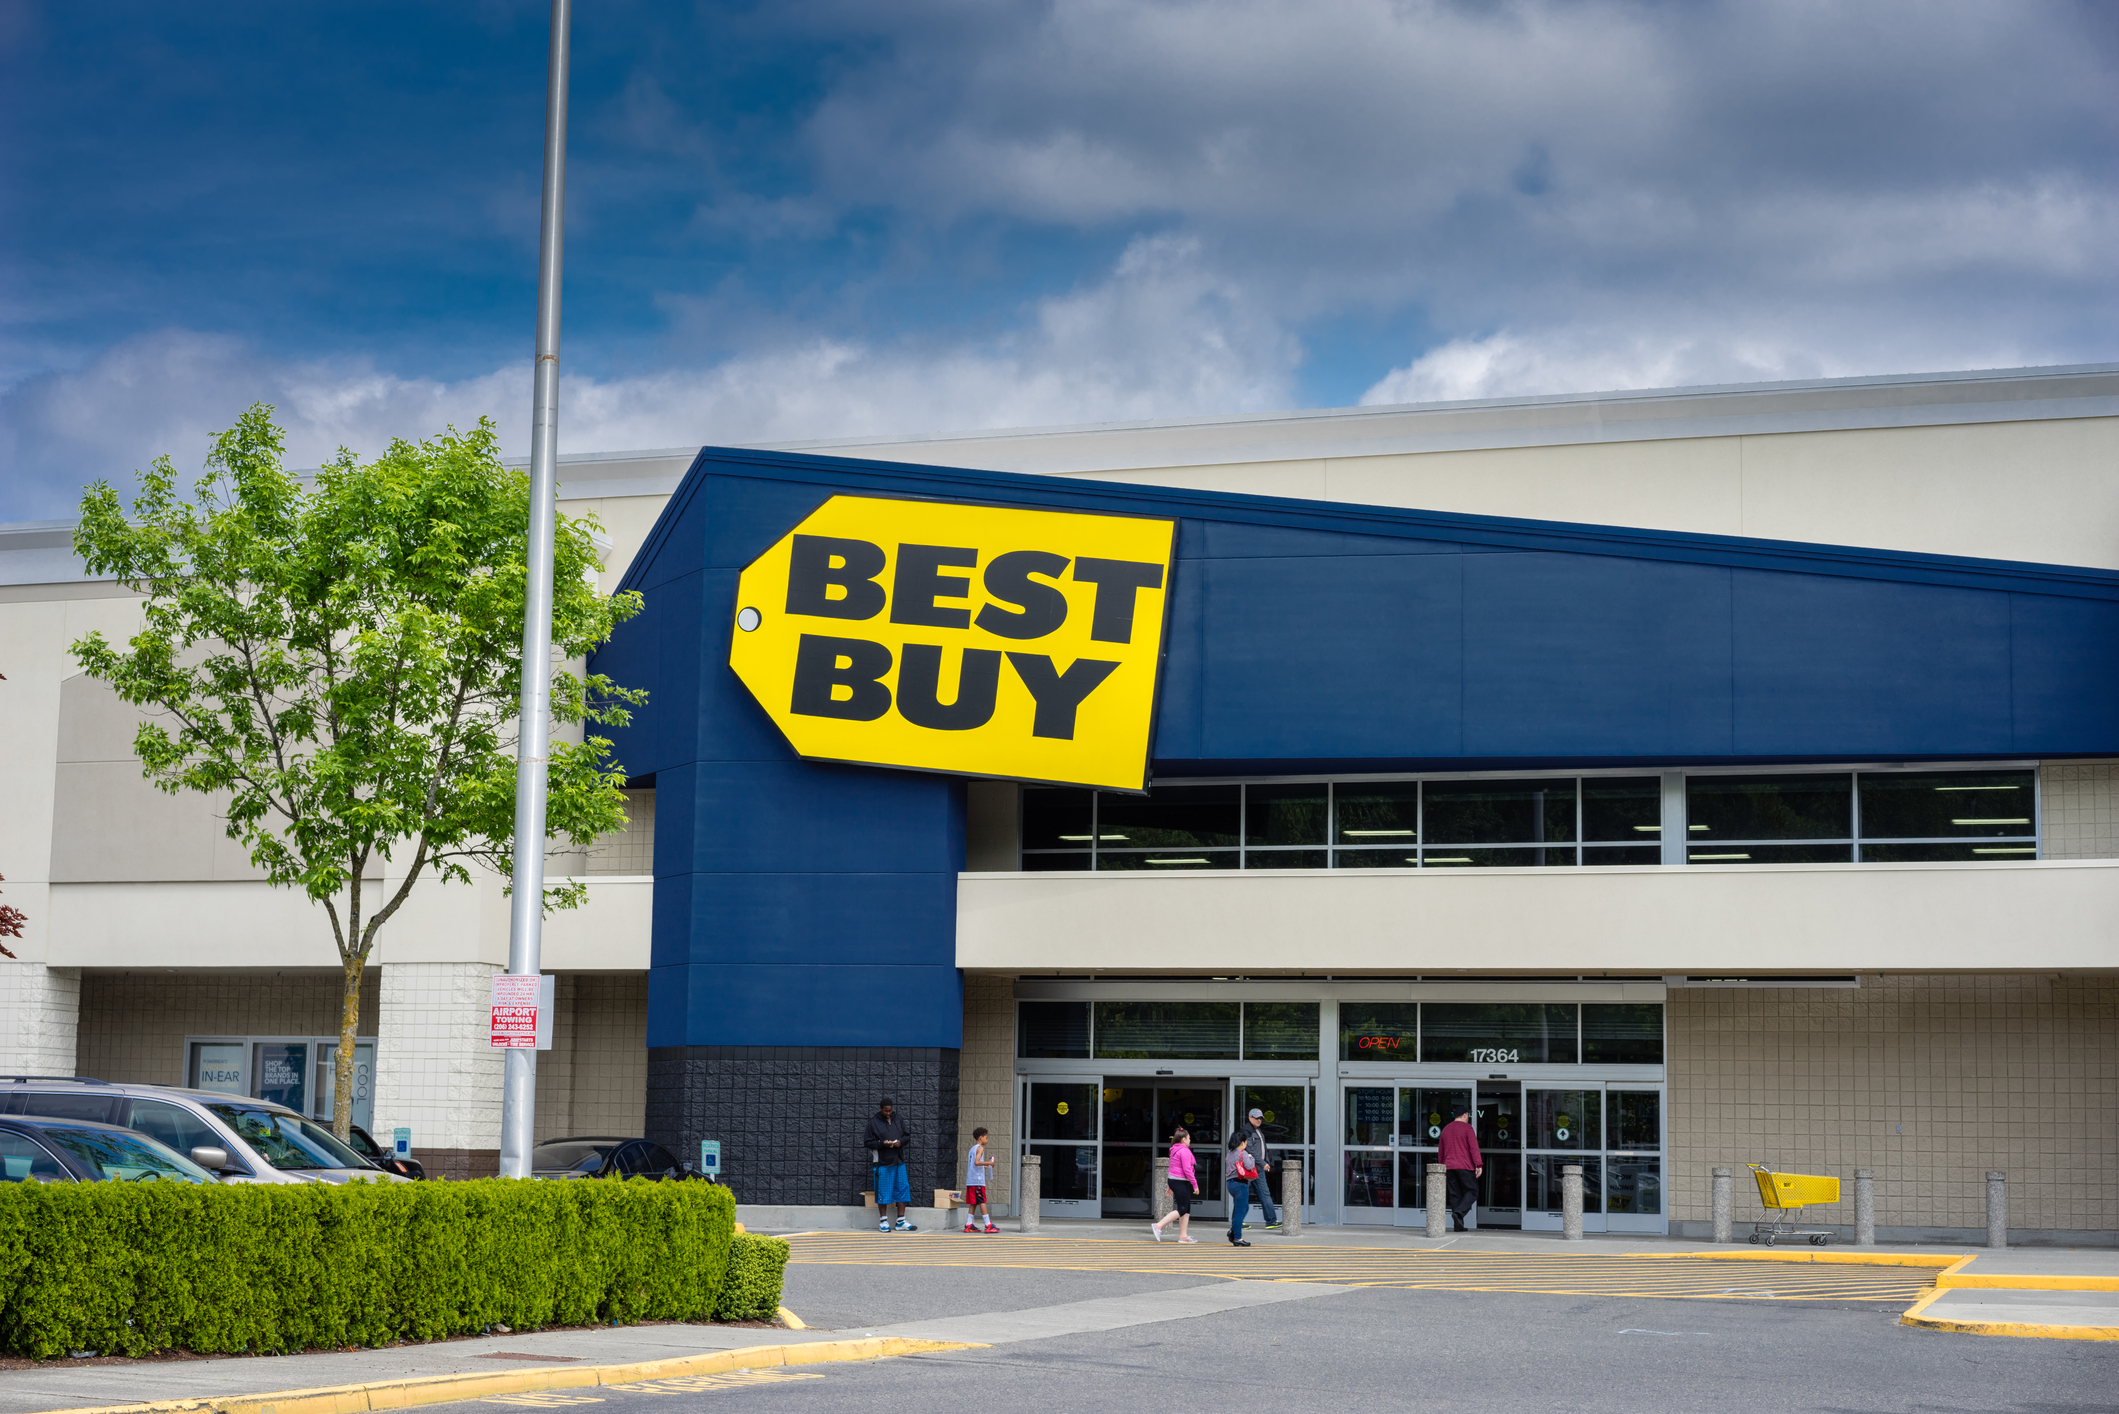 Best Buy coupons & promo codes: Save big on electronics